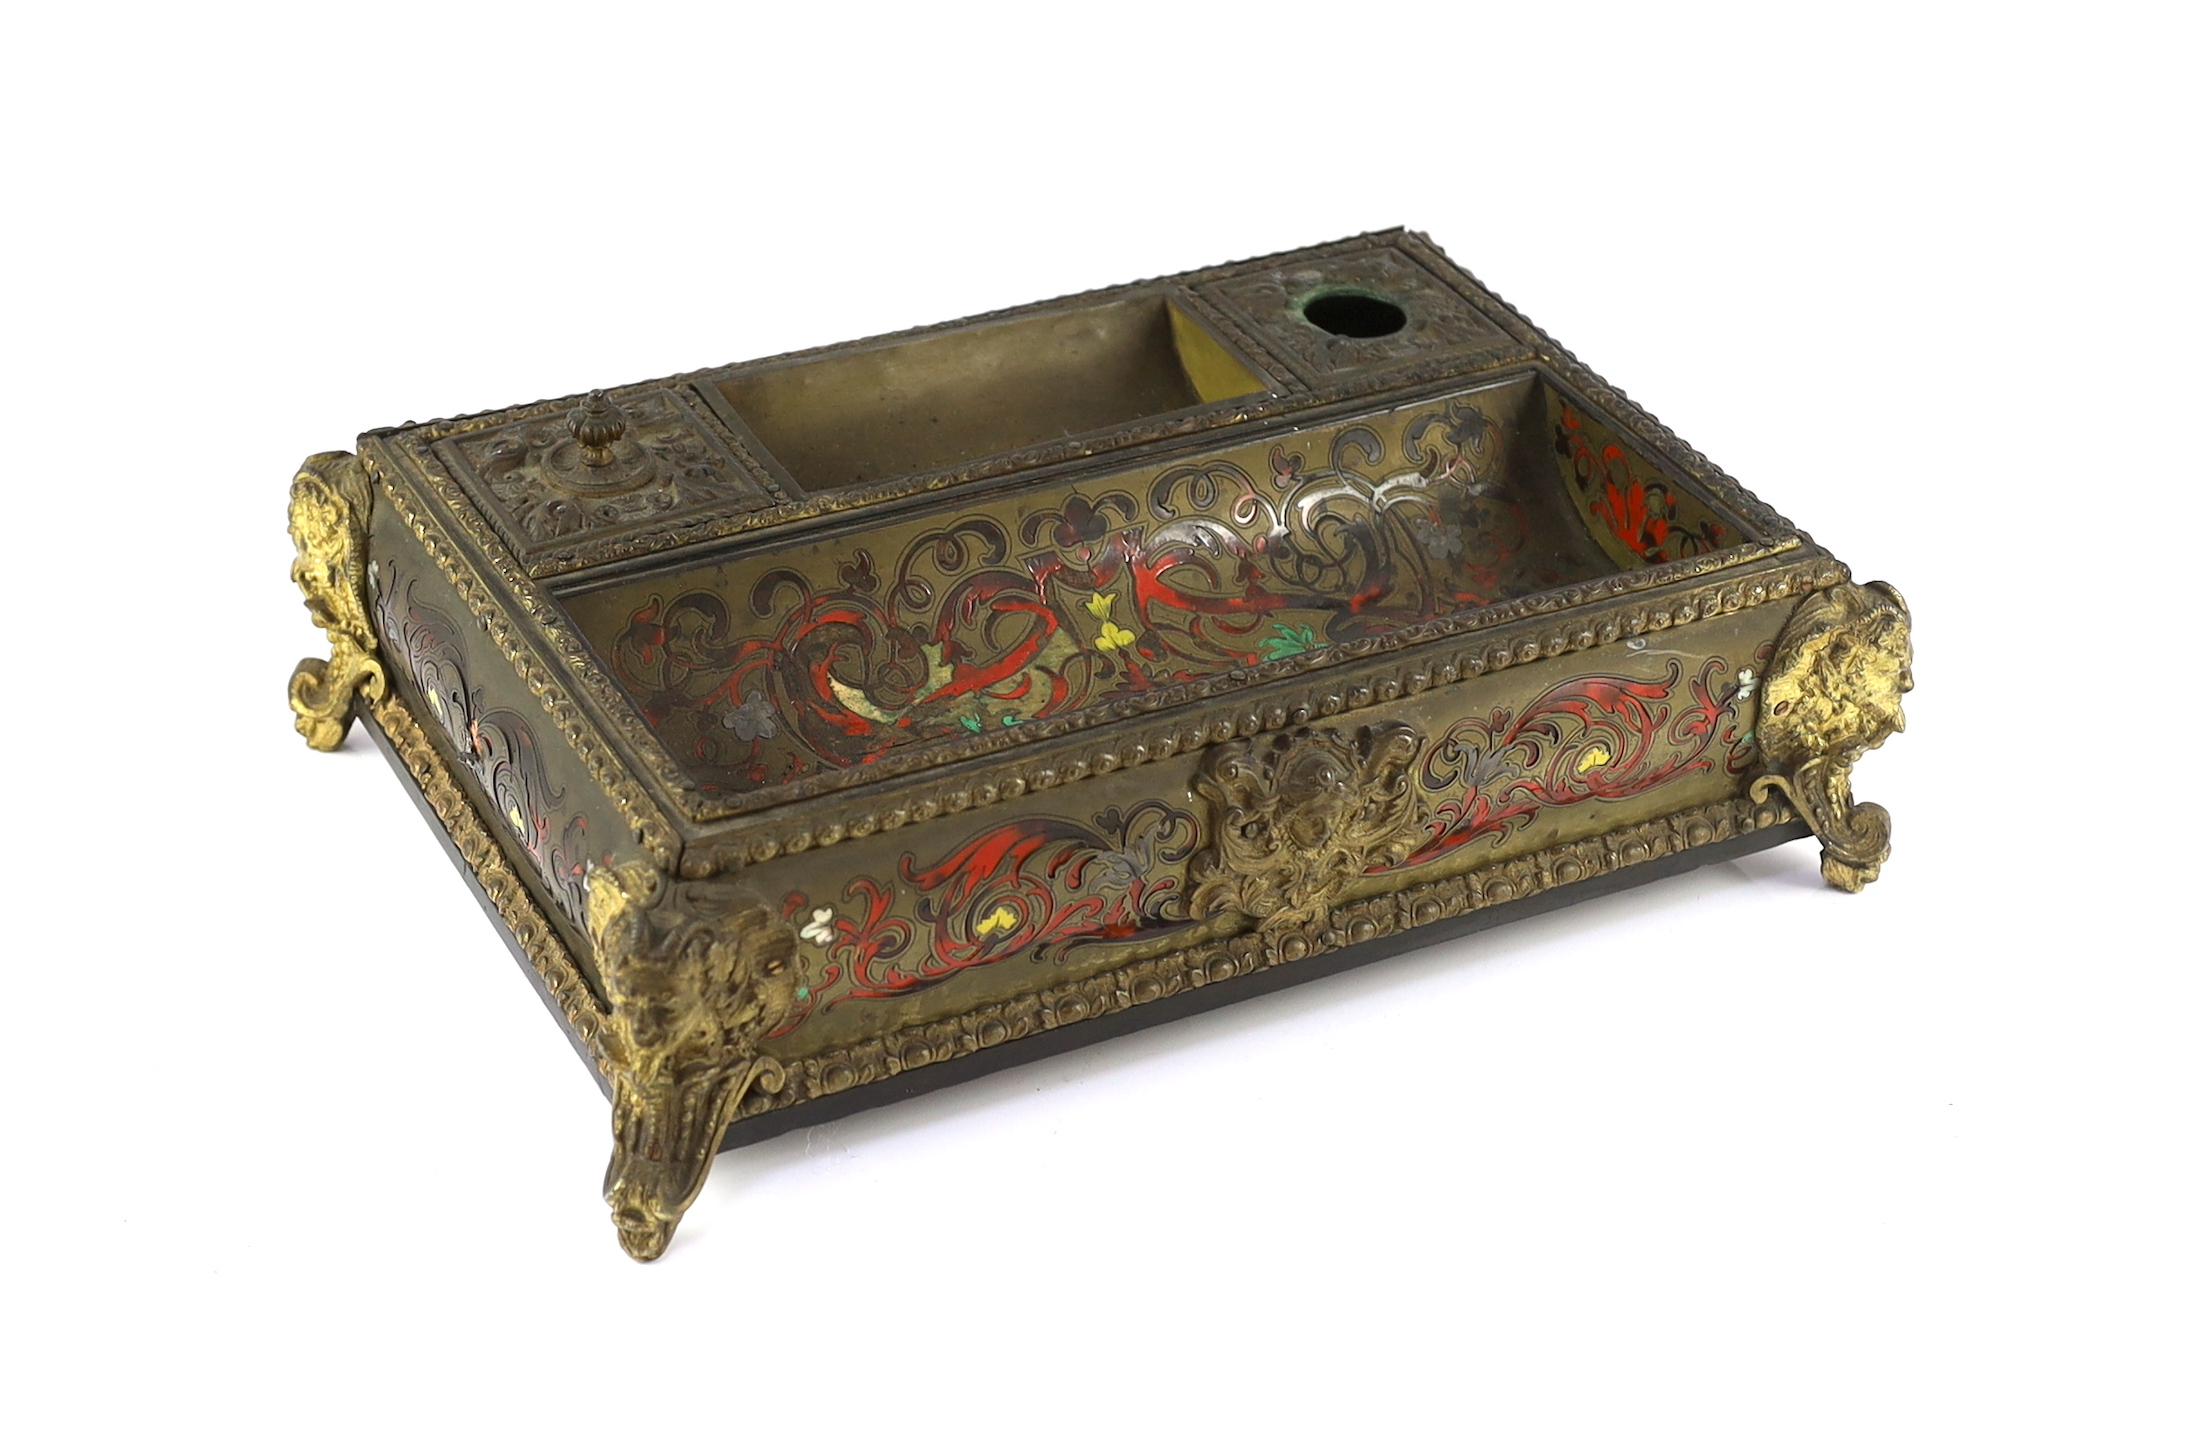 A 19th century French scarlet Boulle work desk stand with ormolu mounts, 36cm wide